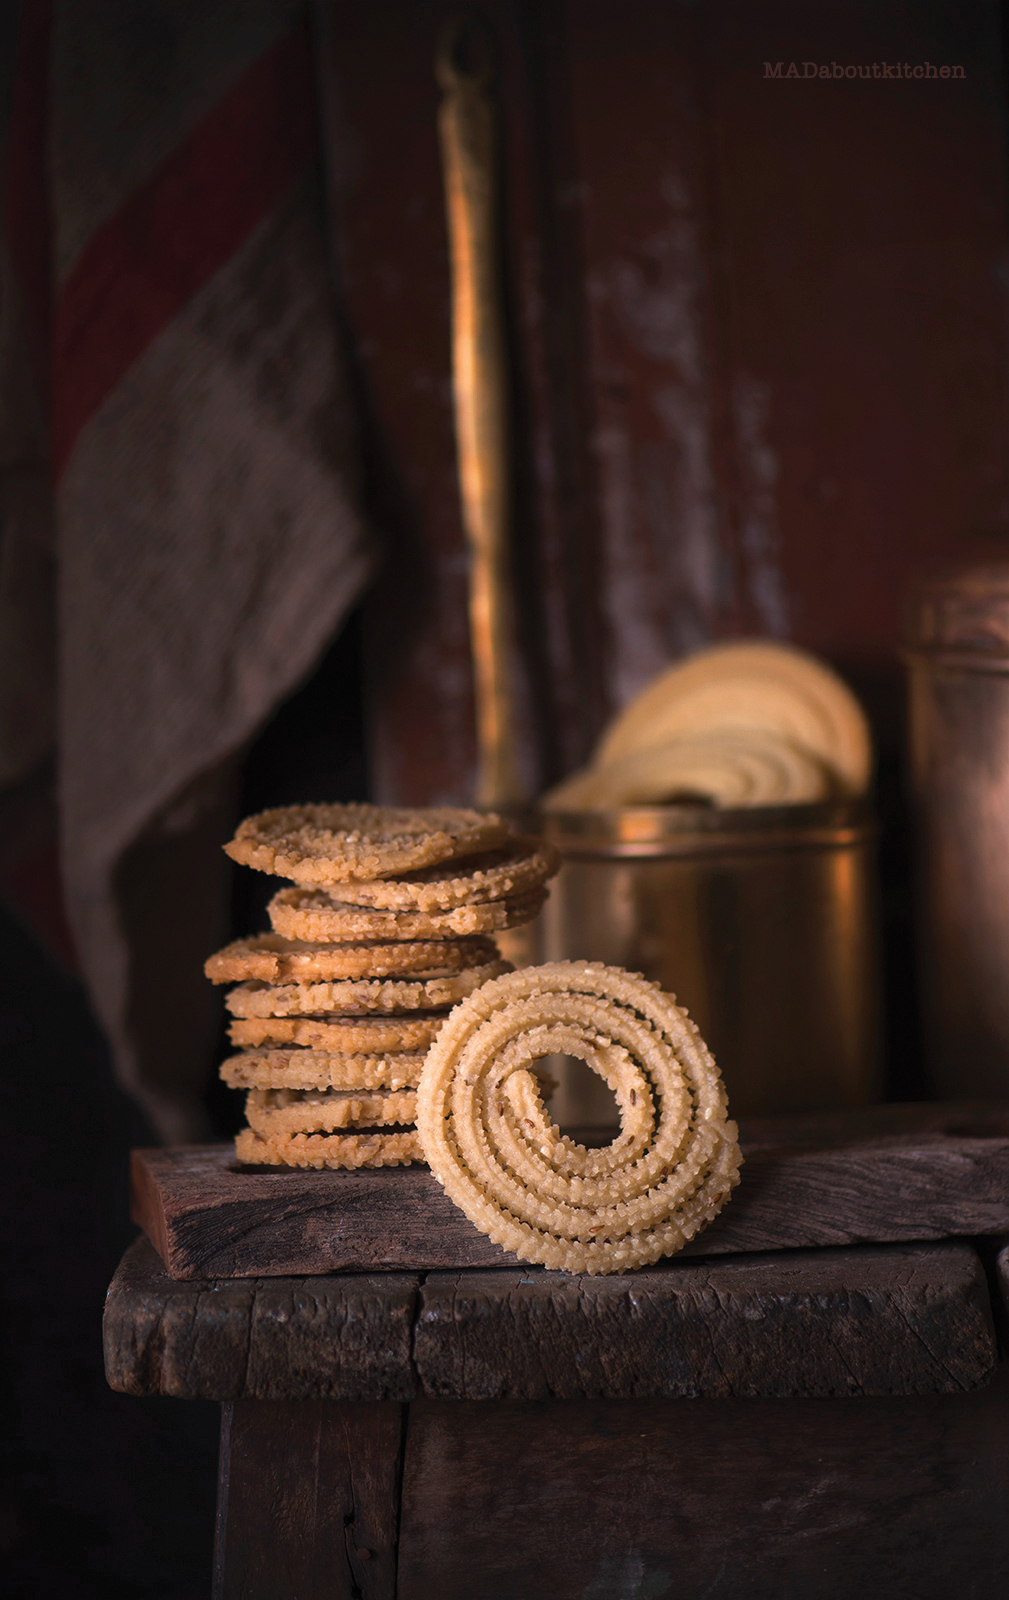  Chakli is a deep fried Indian savoury snack made of rice flour which is crisp and melts in the mouth and is made during Ganesha Chathurthi & other festivals